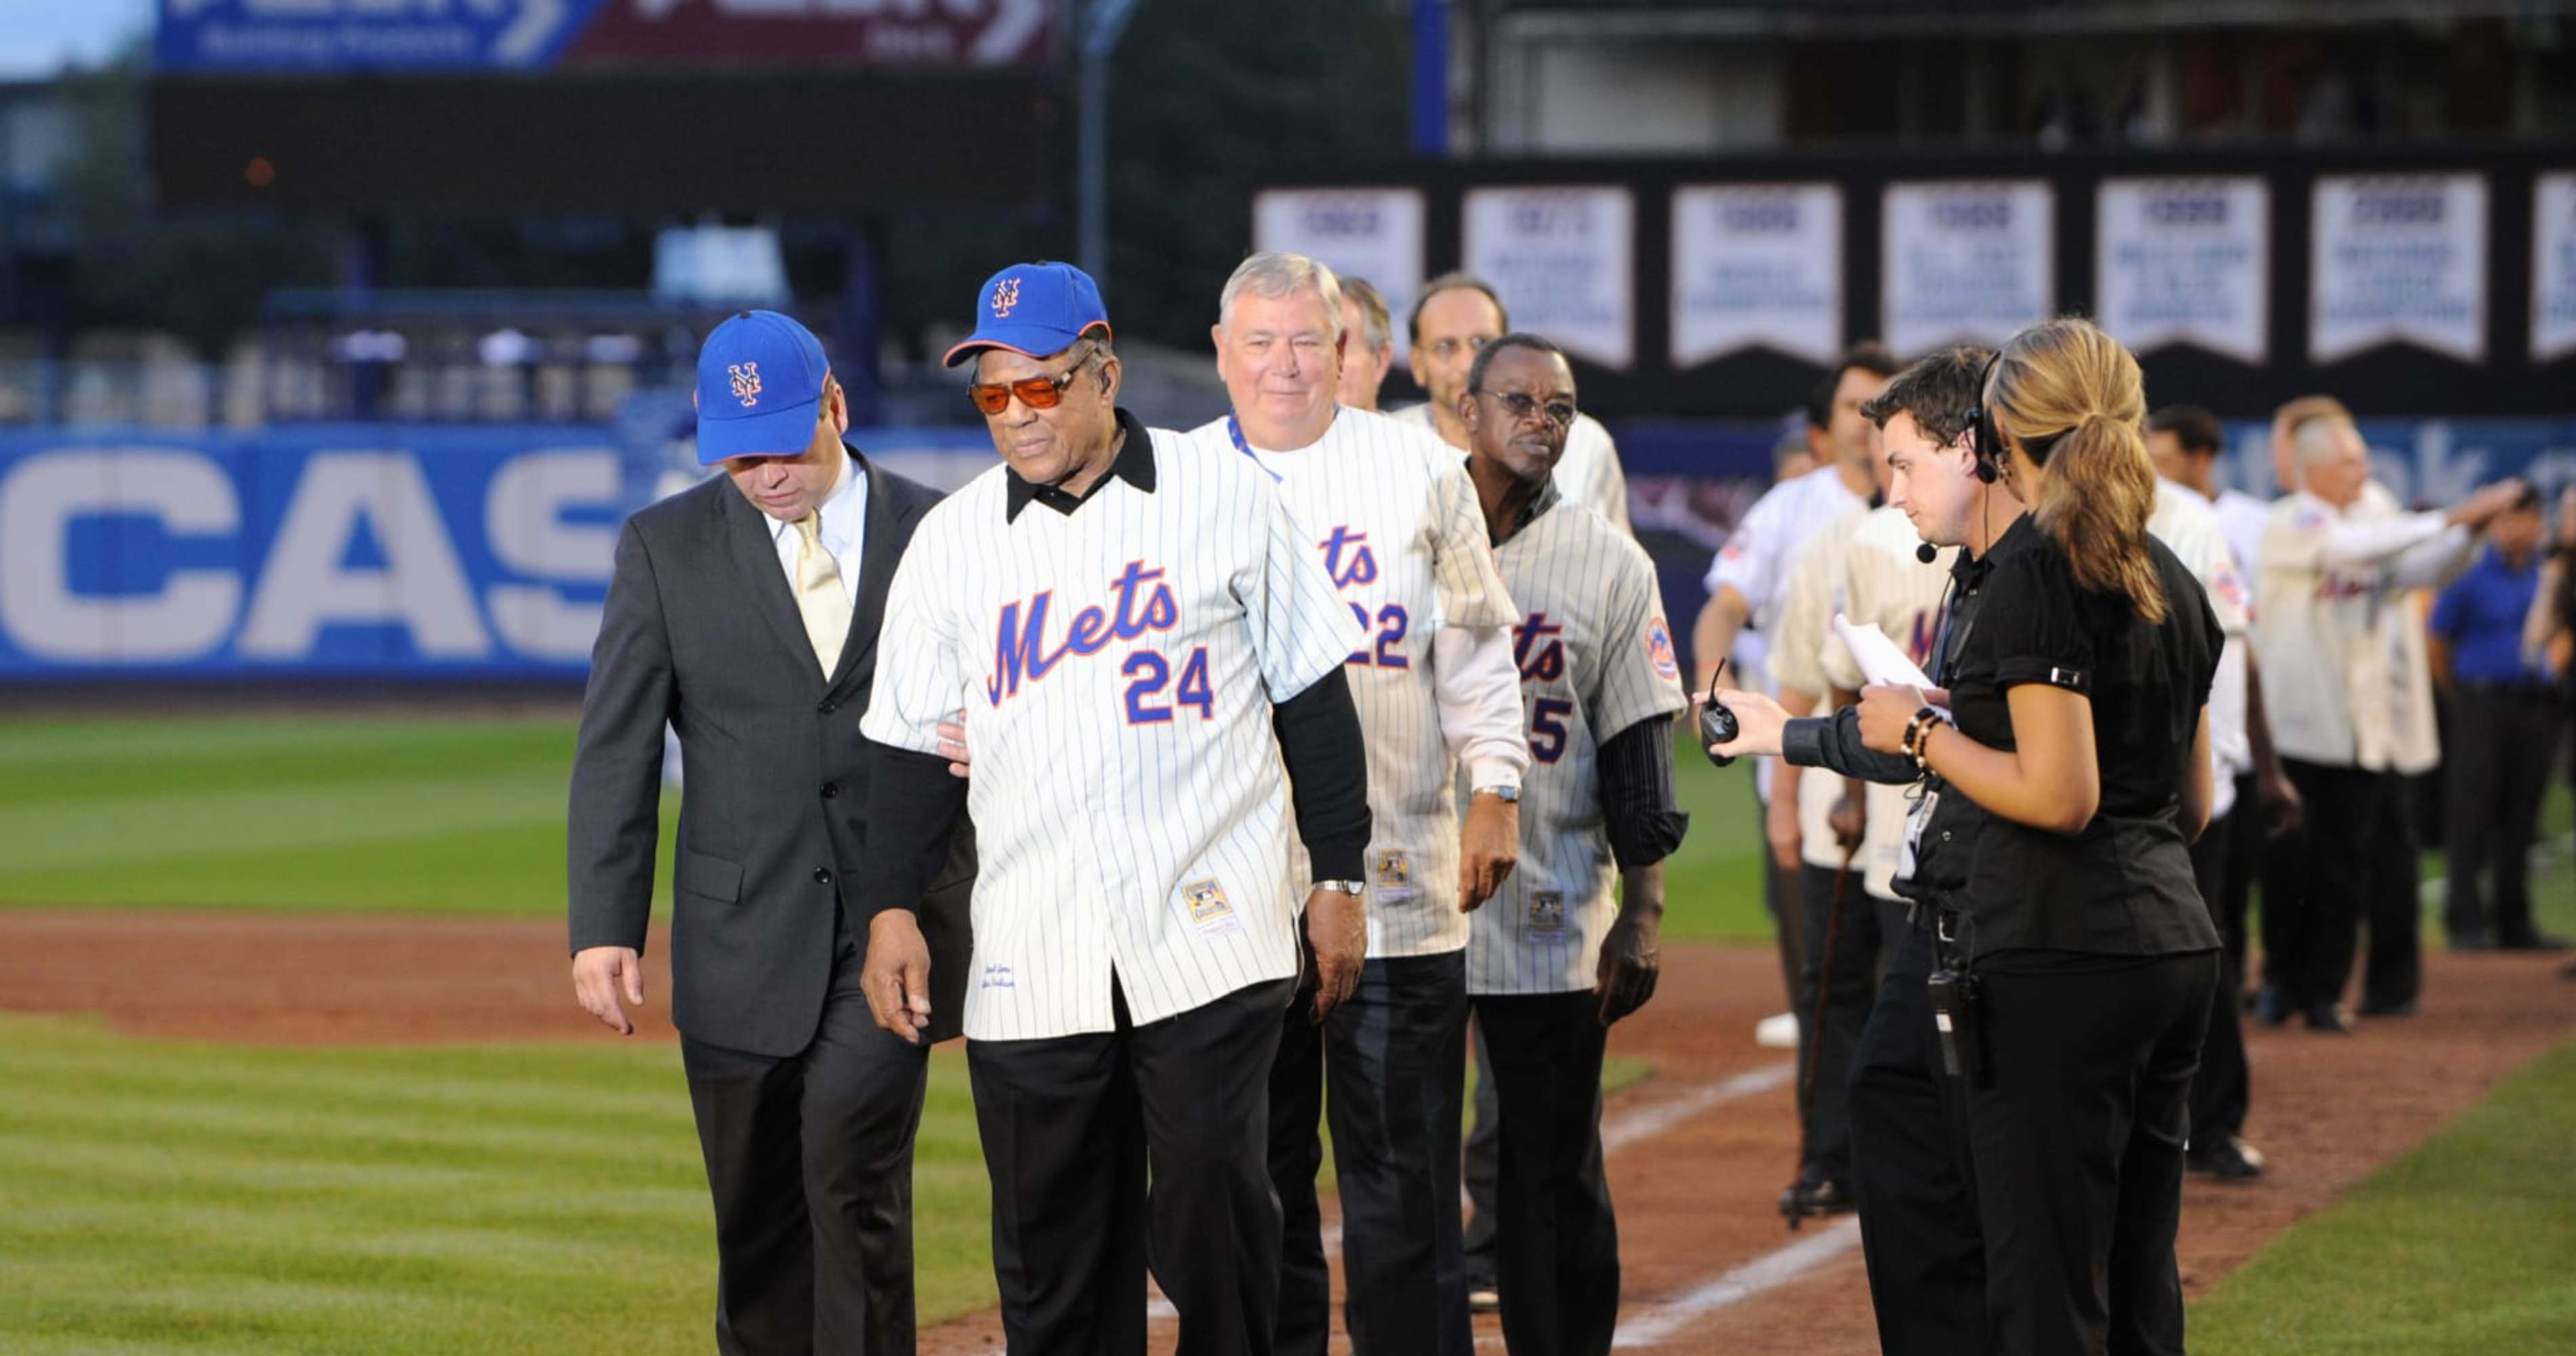 Willie Mays' No. 24 Jersey Retired by Mets; Played 2 Seasons with NY